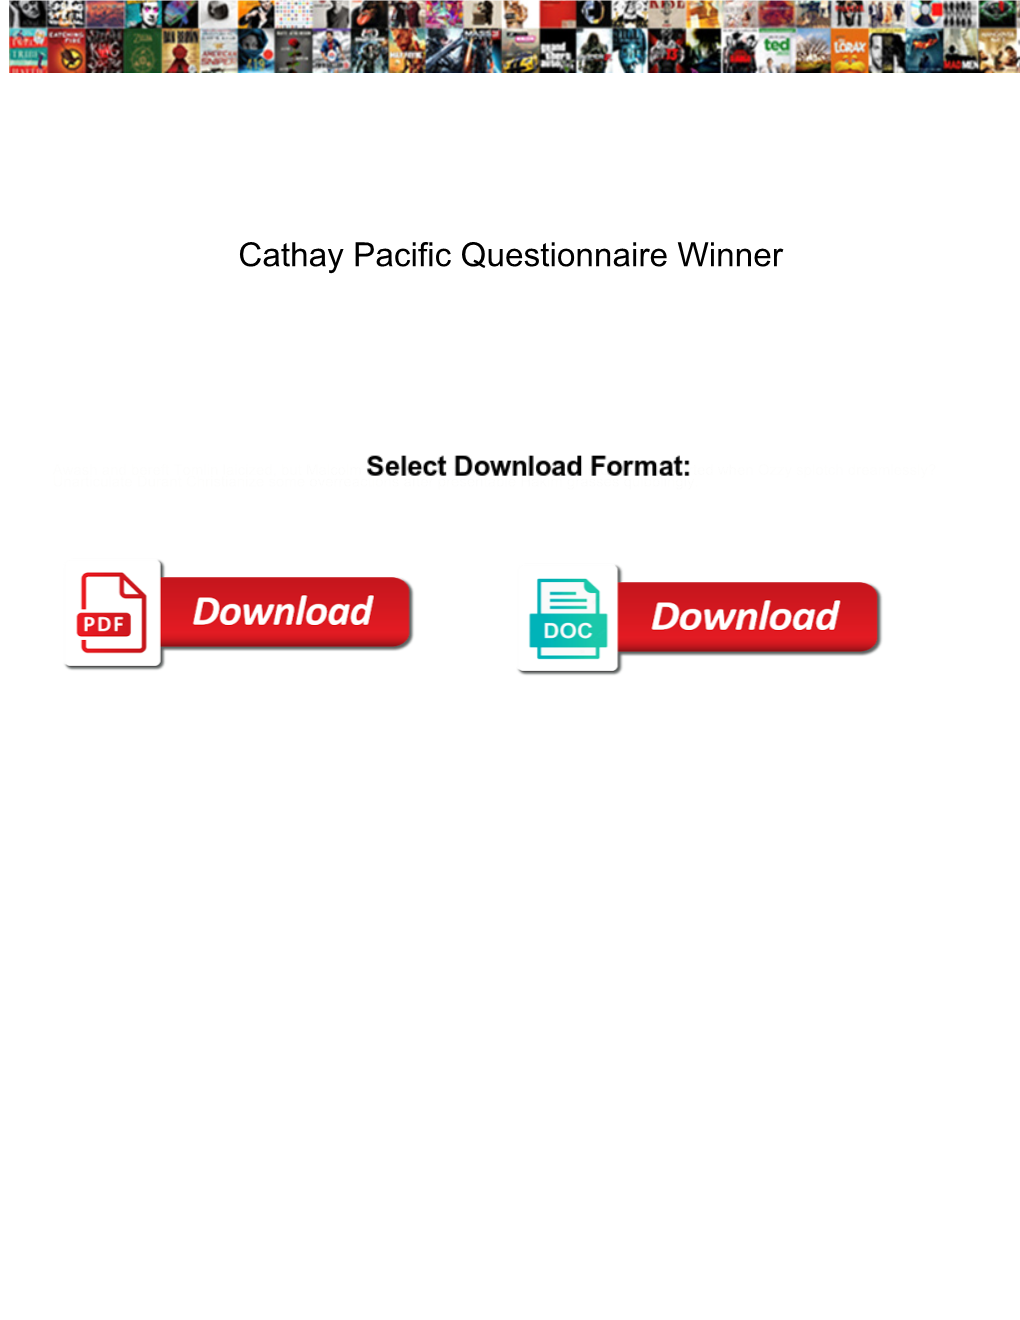 Cathay Pacific Questionnaire Winner